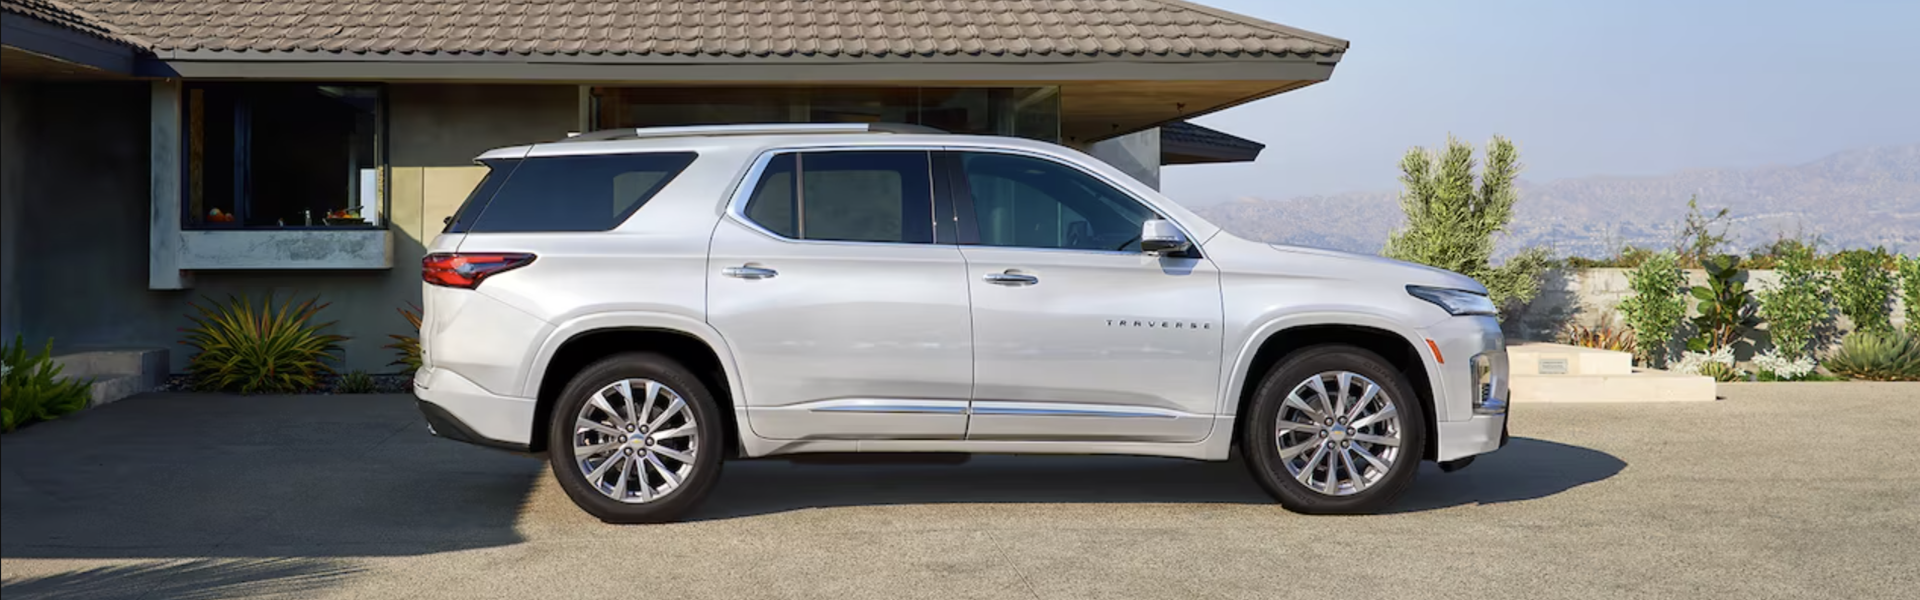 2024 Chevrolet Traverse in white side view